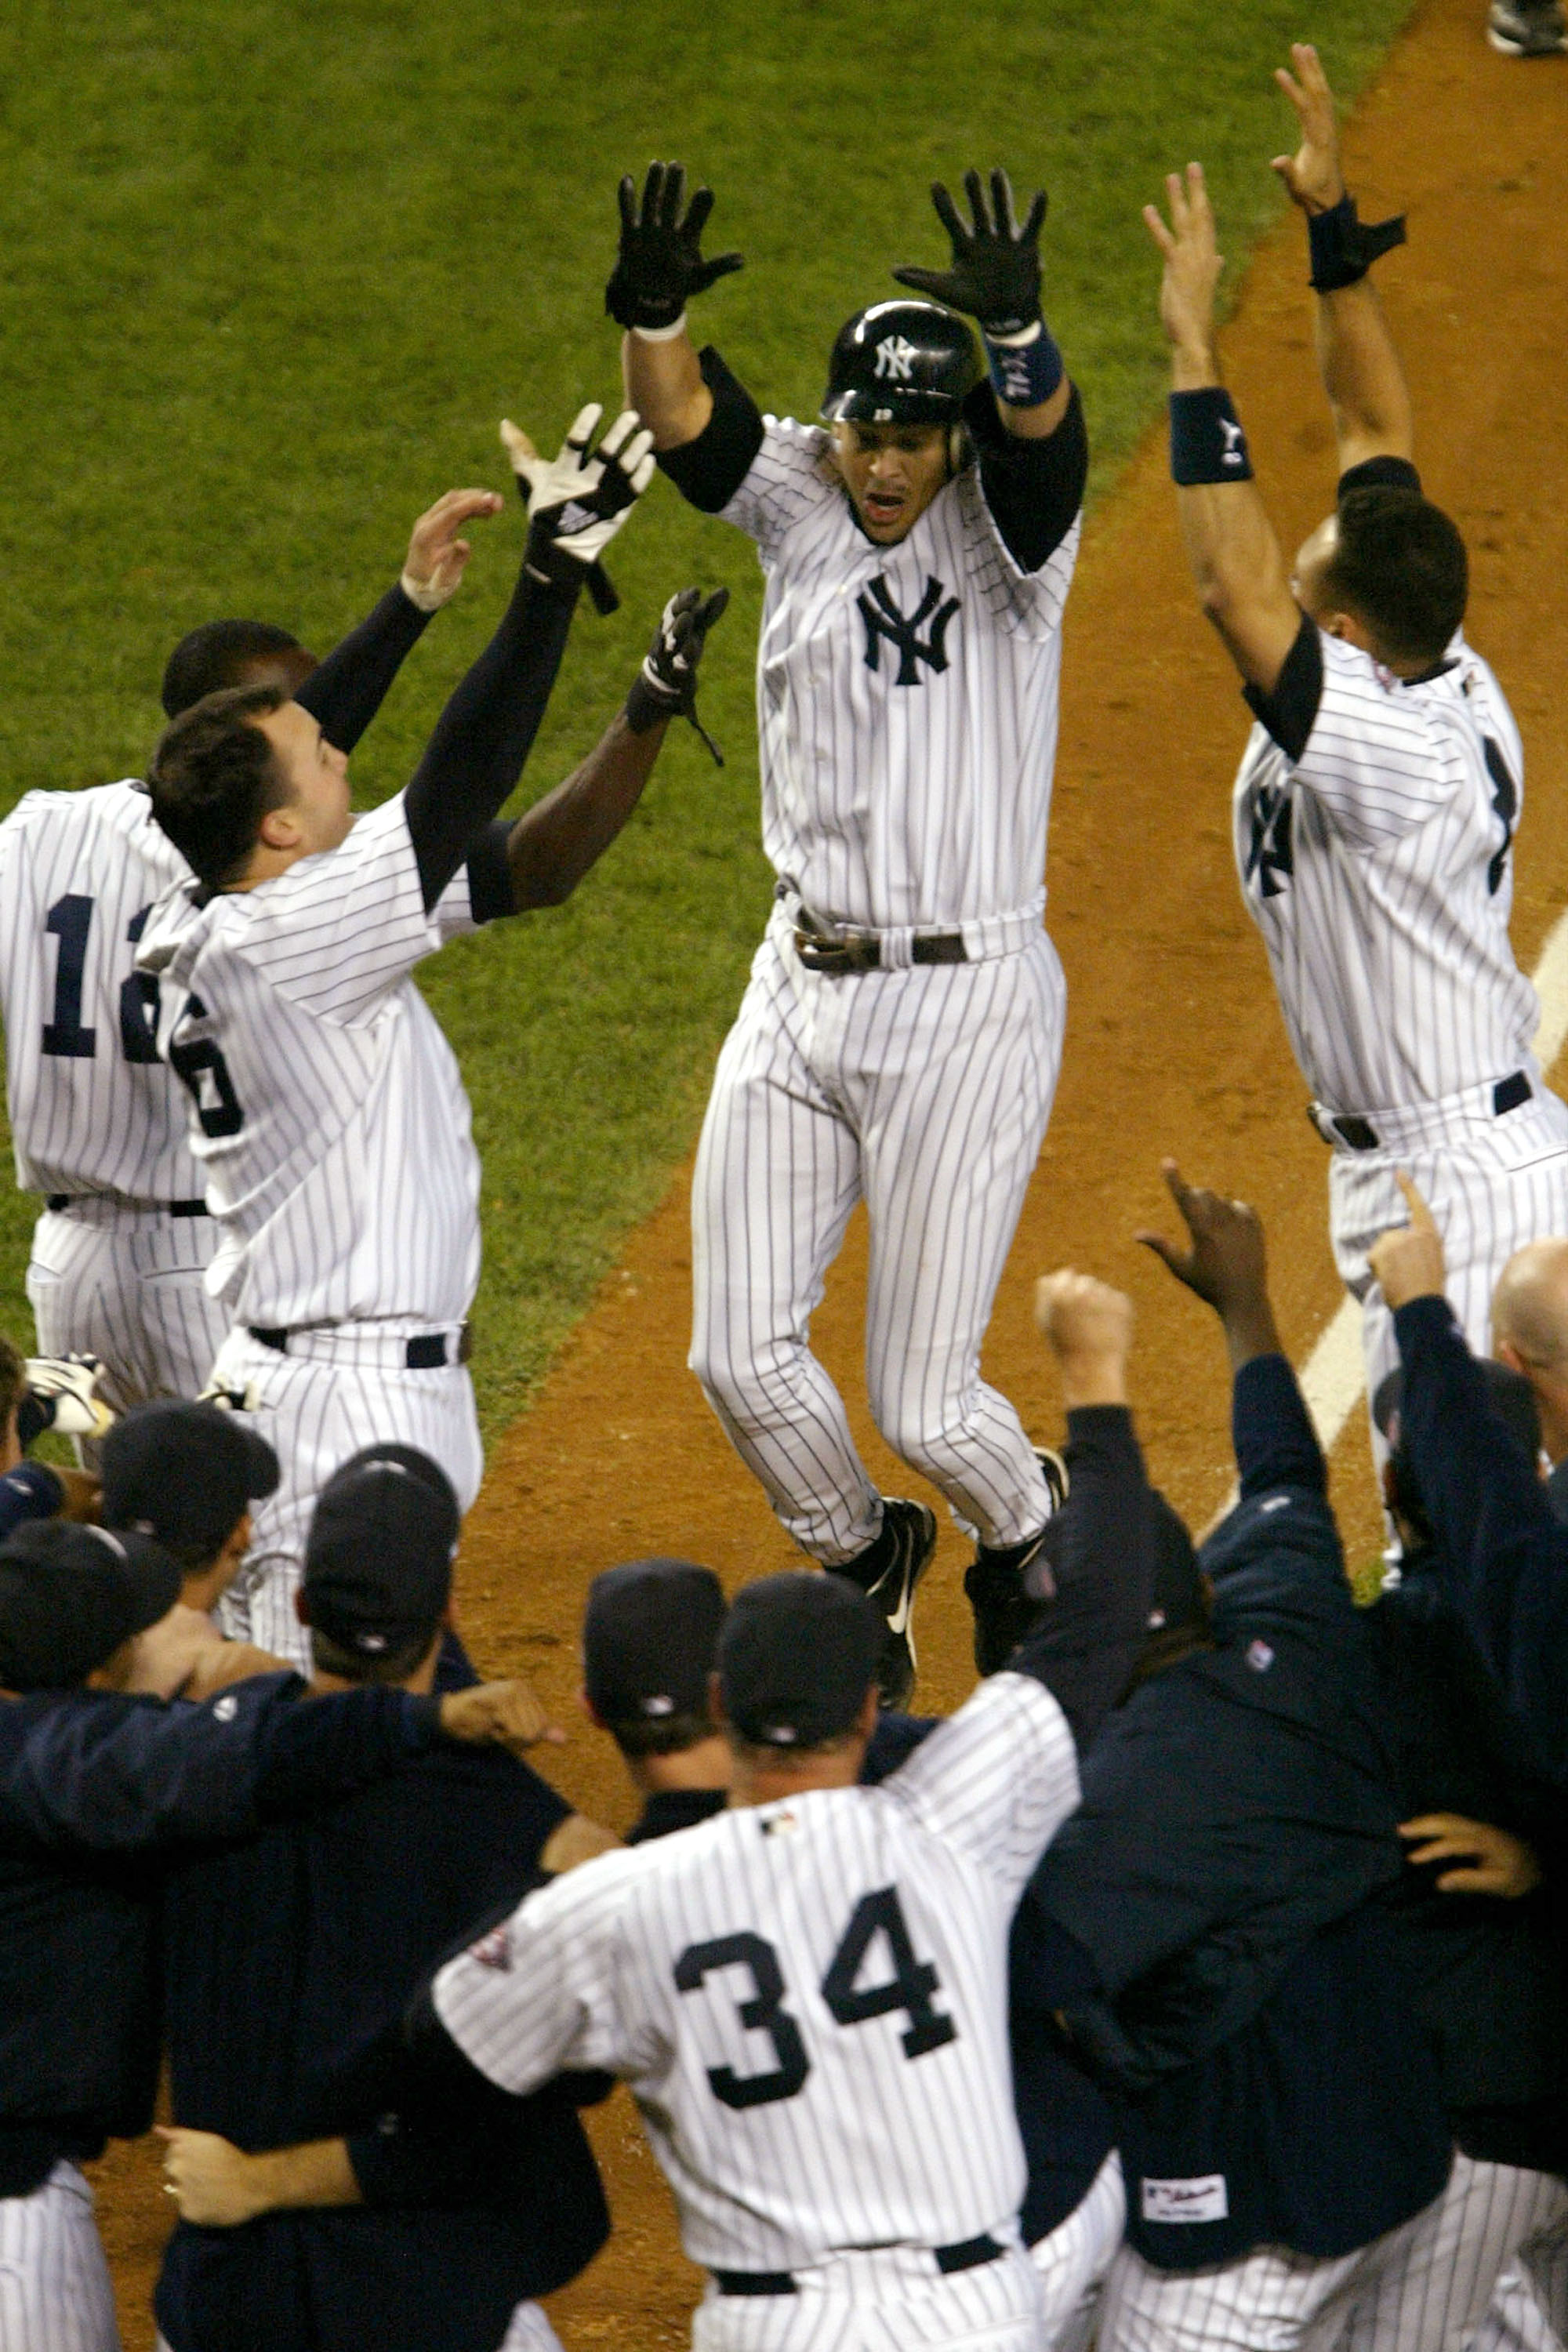 Aaron Boone walk-off HR 2003 ALCS, On this day in 2003, Aaron Boone hit an  11th-inning walk-off homer to clinch the pennant and send the Yankees to  the World Series!